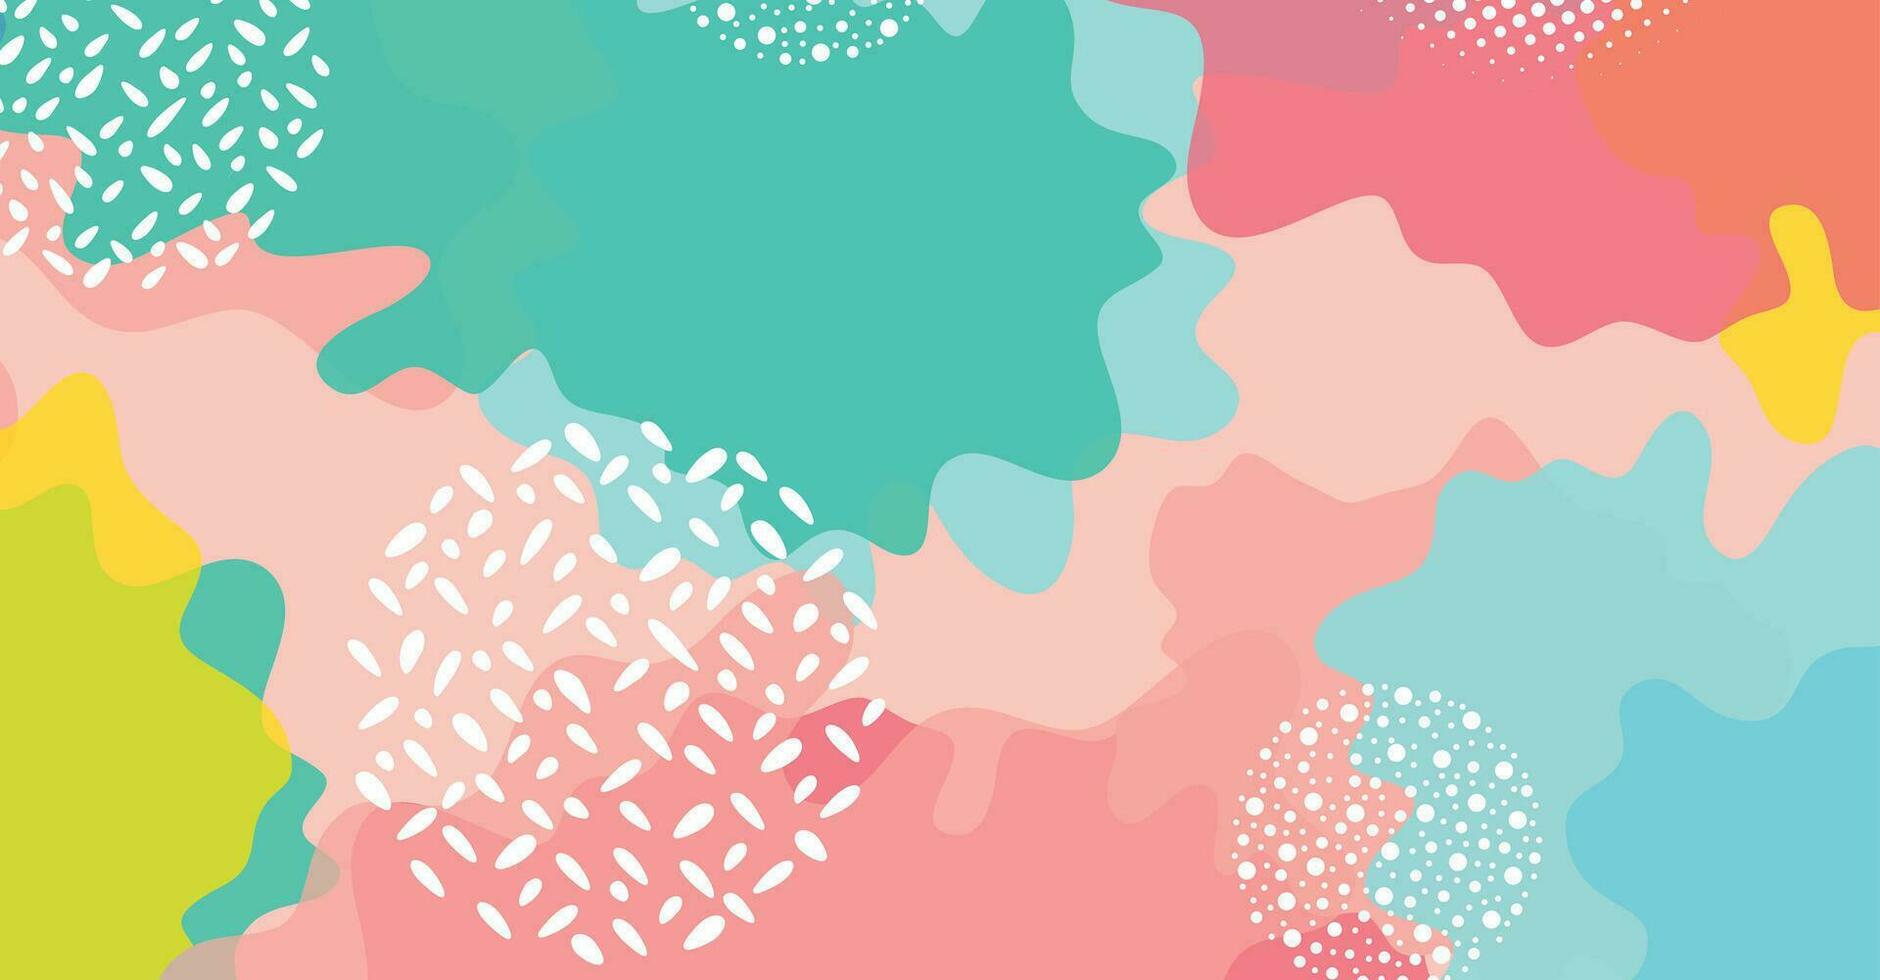 Abstract creative background with geometric shape and color vector